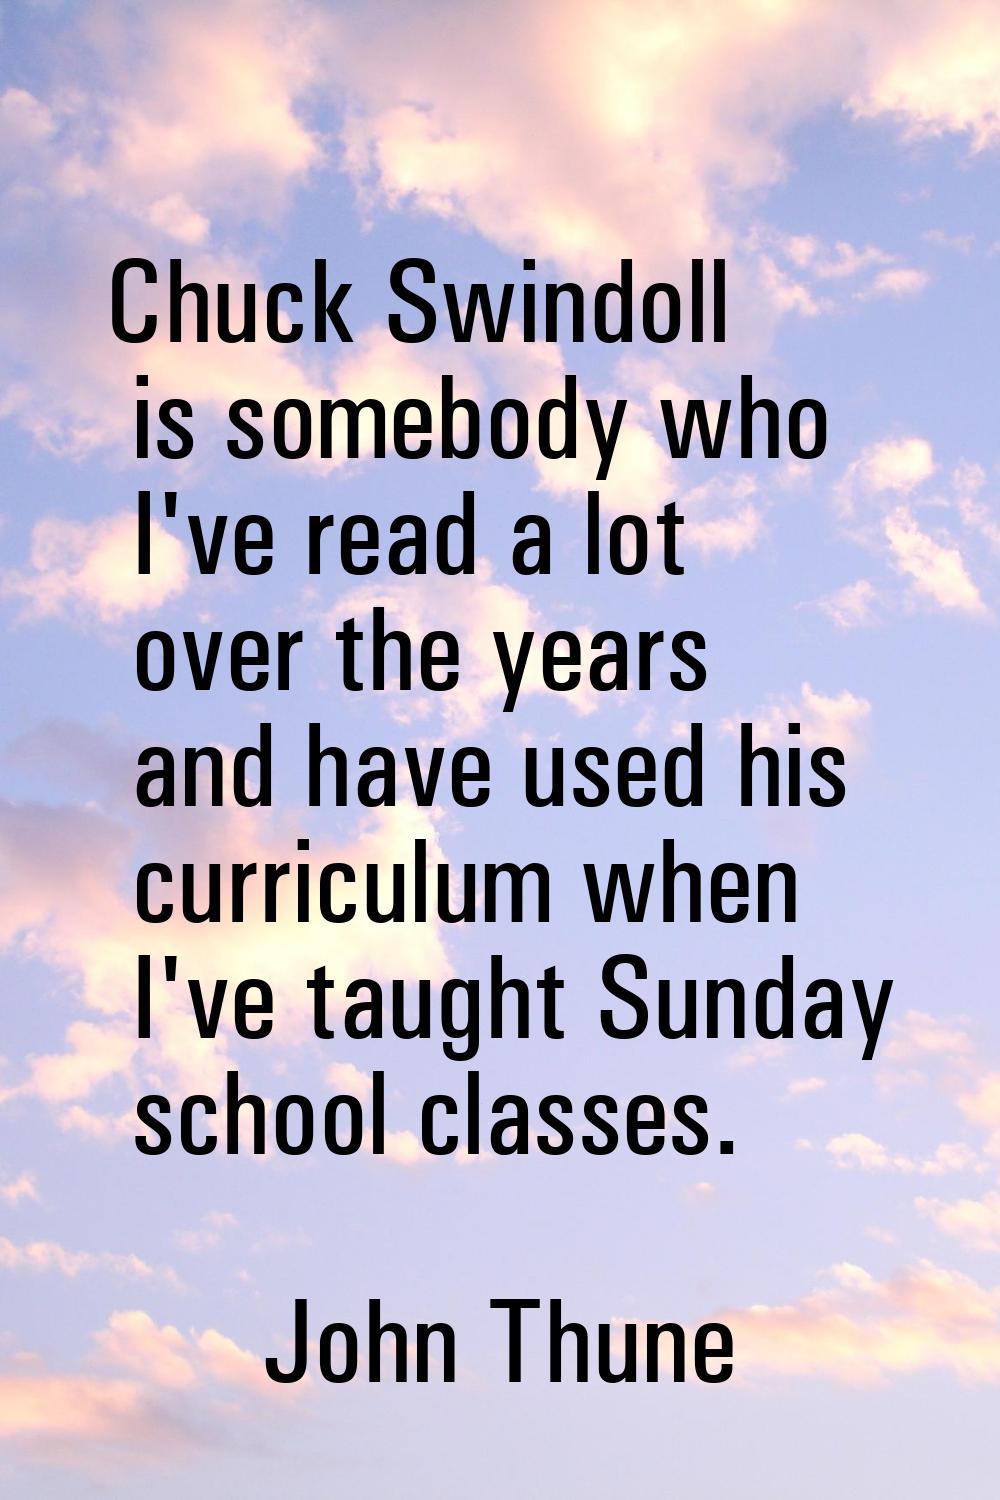 Chuck Swindoll is somebody who I've read a lot over the years and have used his curriculum when I'v